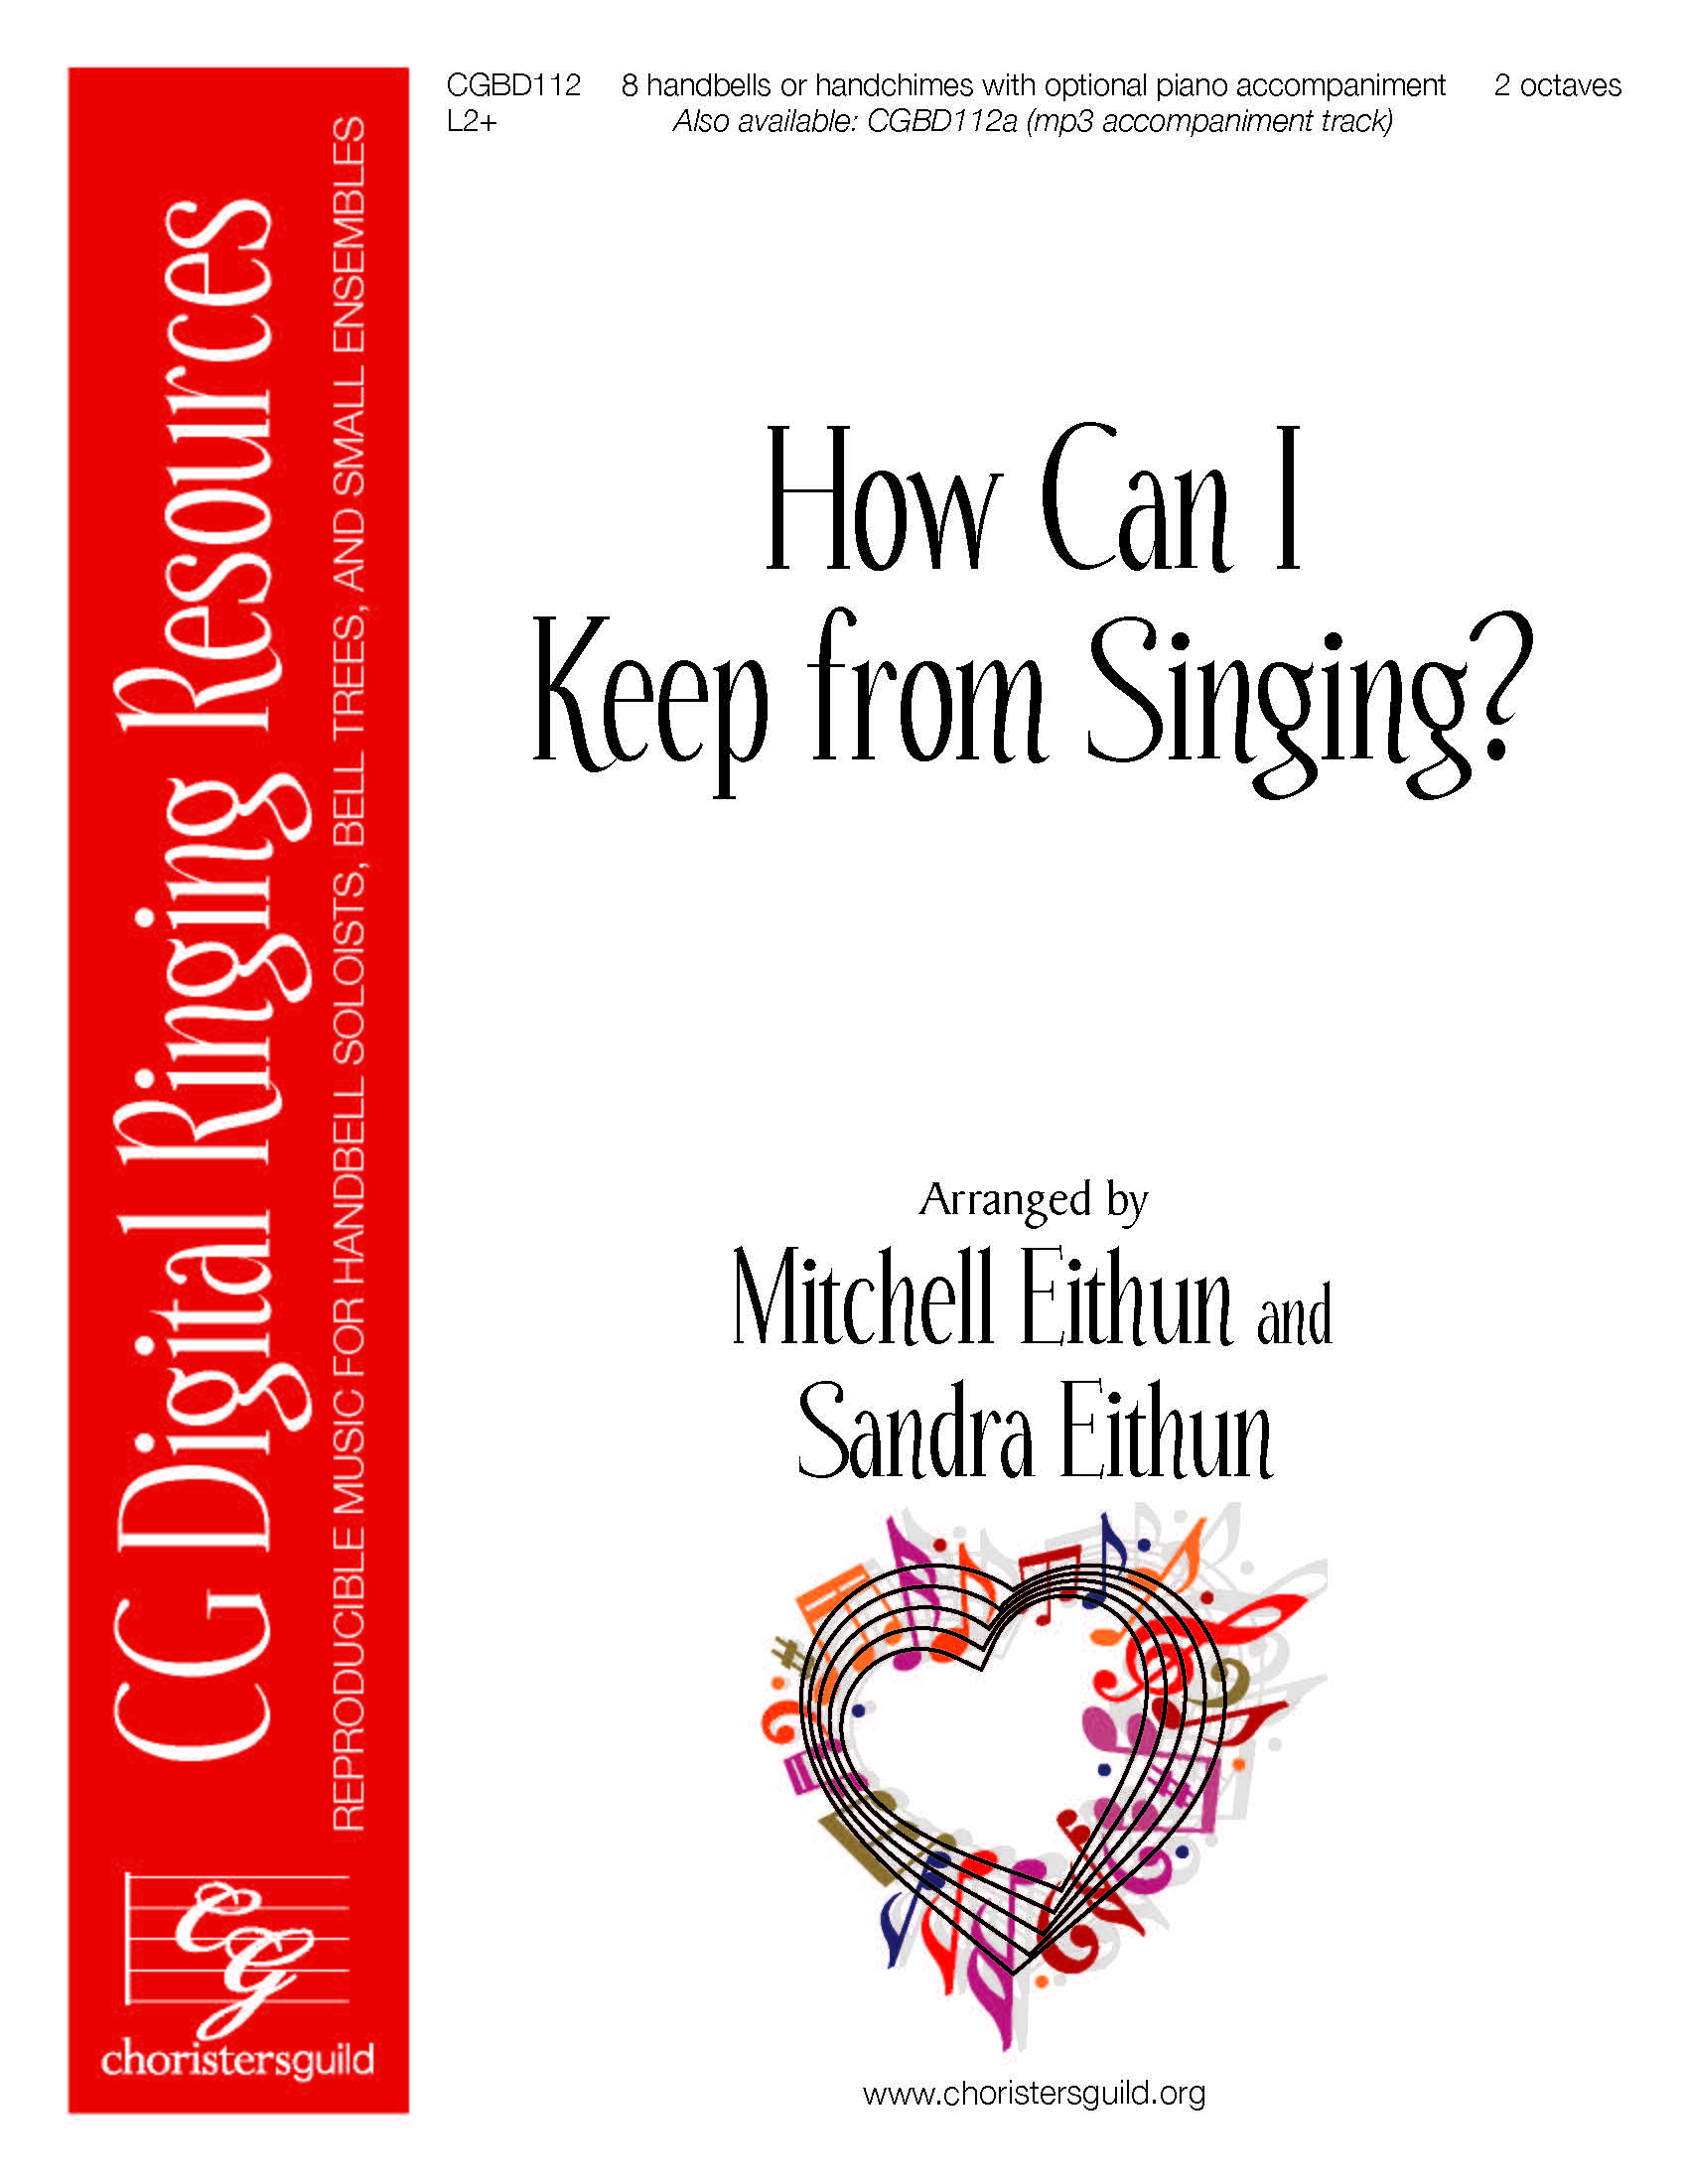 How Can I Keep from Singing? - Digital Accompaniment Track